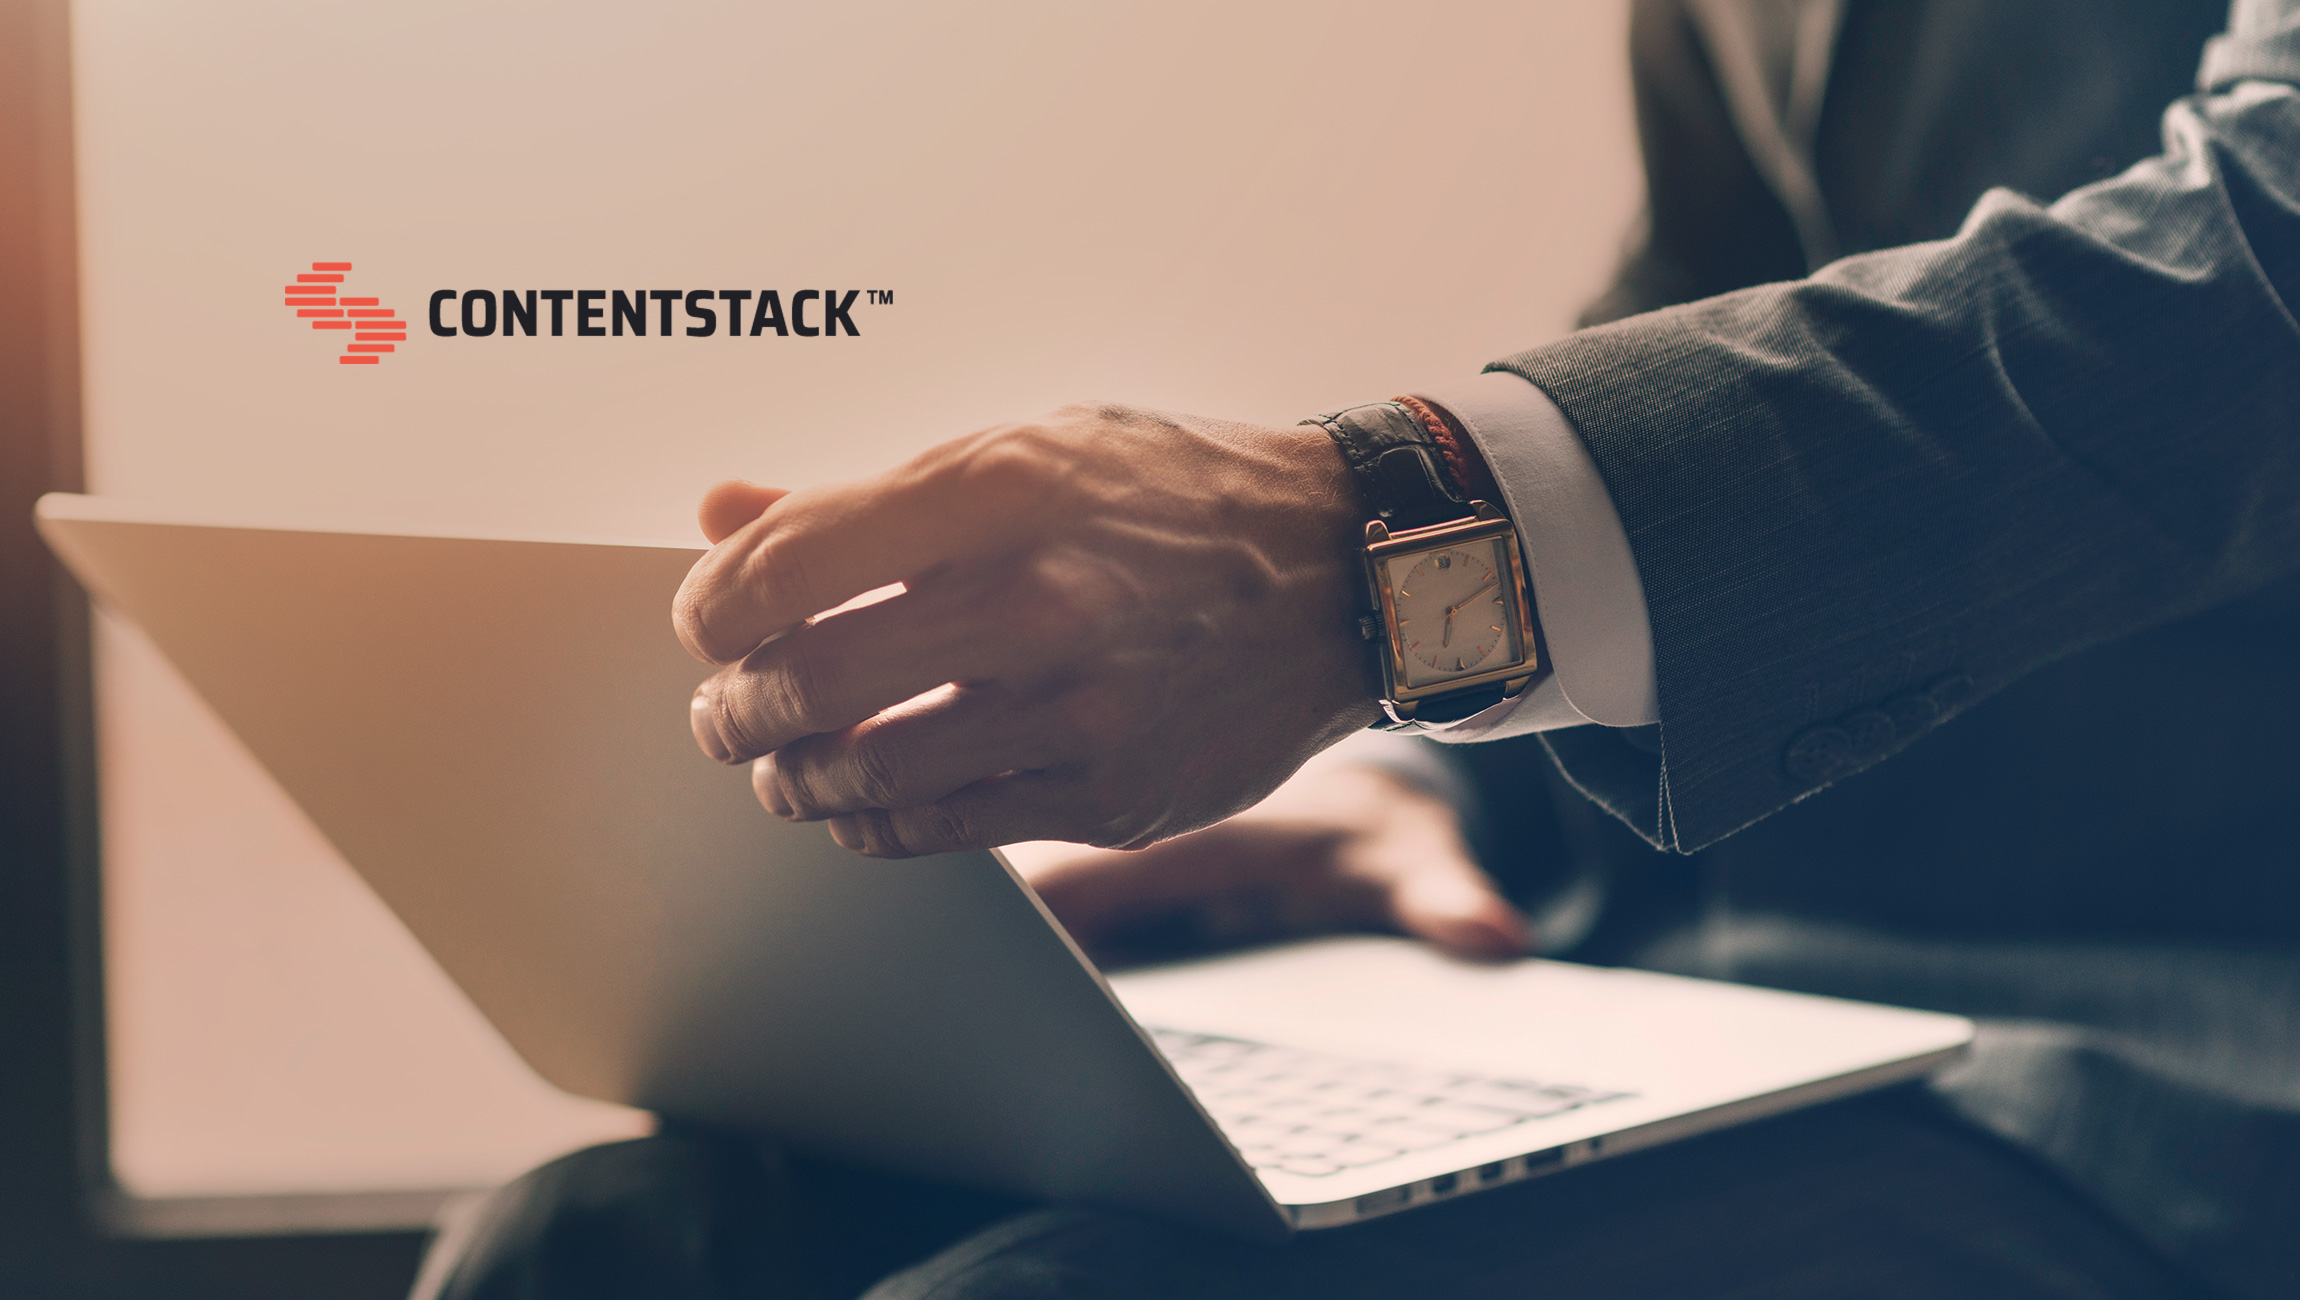 Contentstack Wins Four 2020 Comparably Best Places to Work Awards